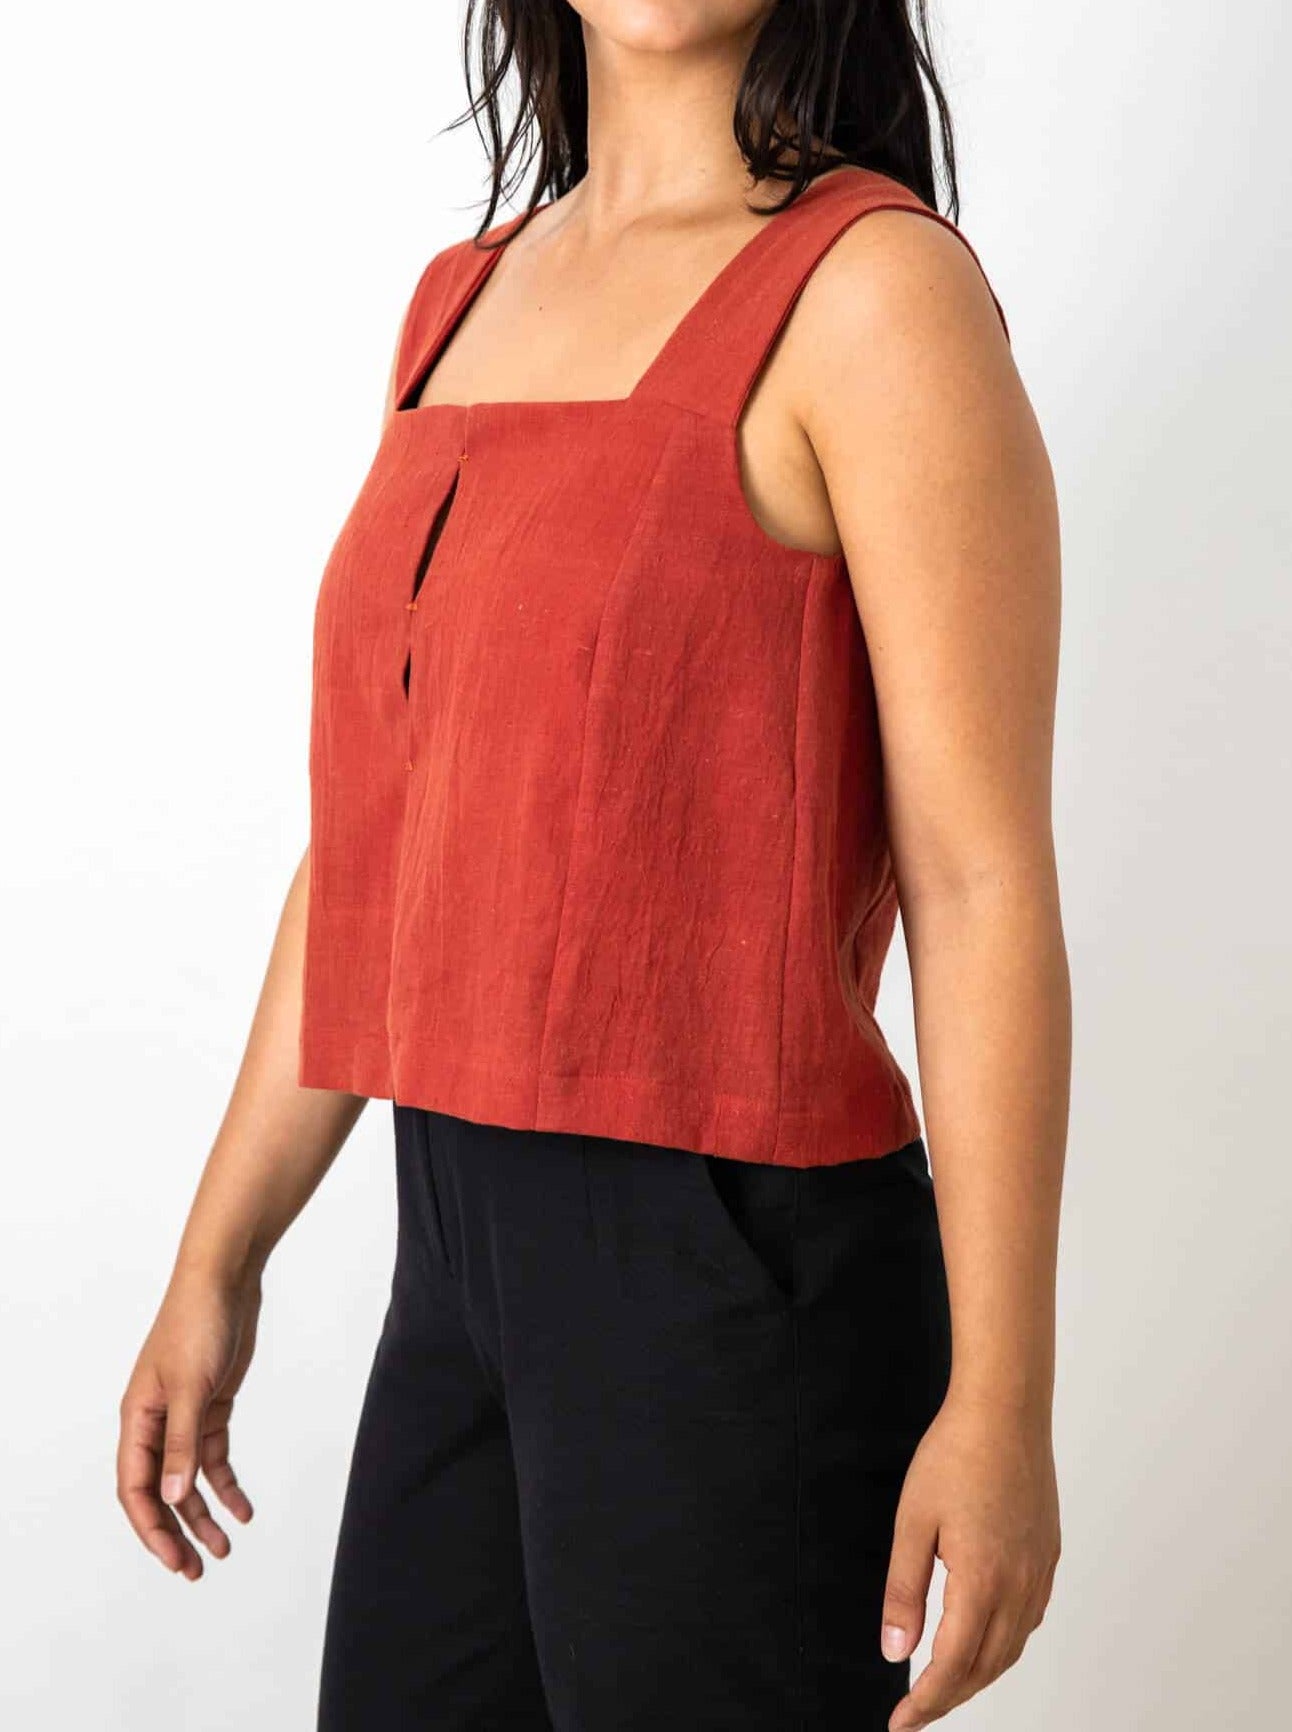 NTG Fad TOP Square neck vest top-（Hand Made）